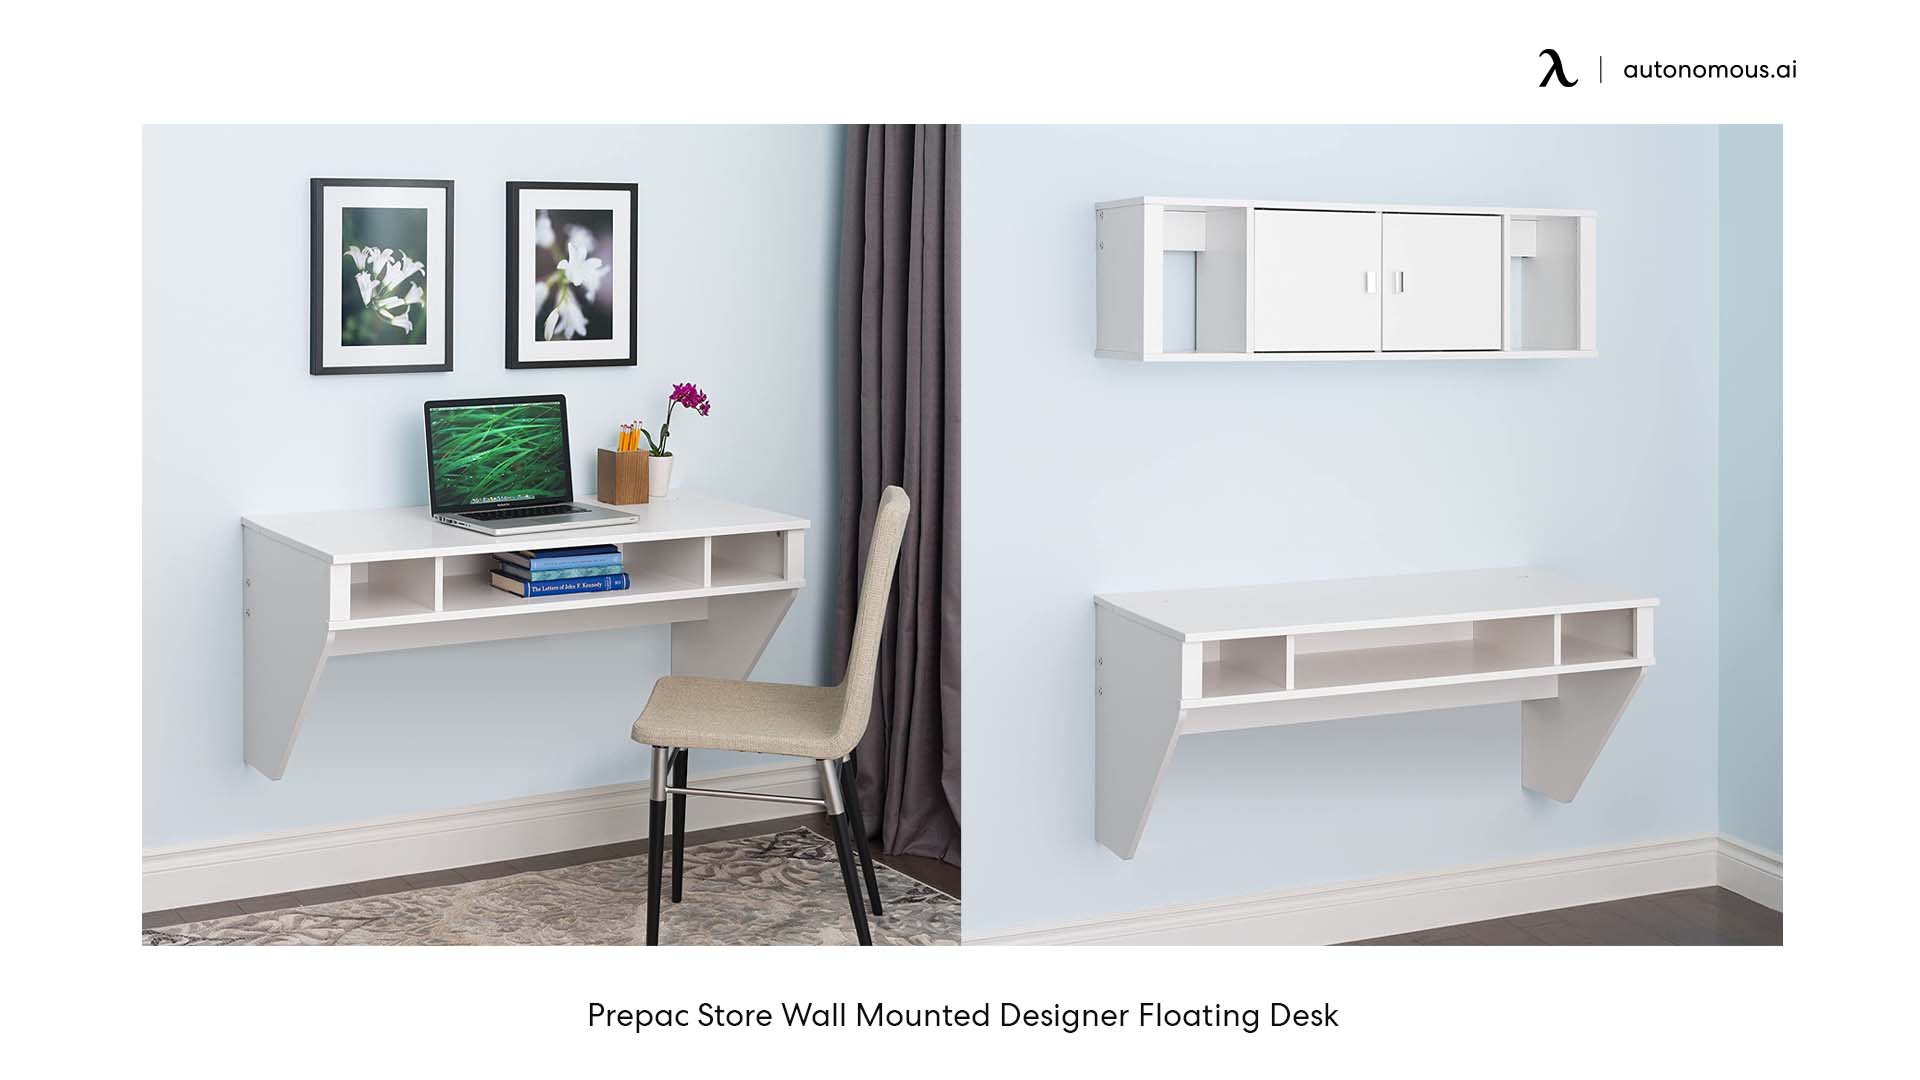 The floating desk is ideal